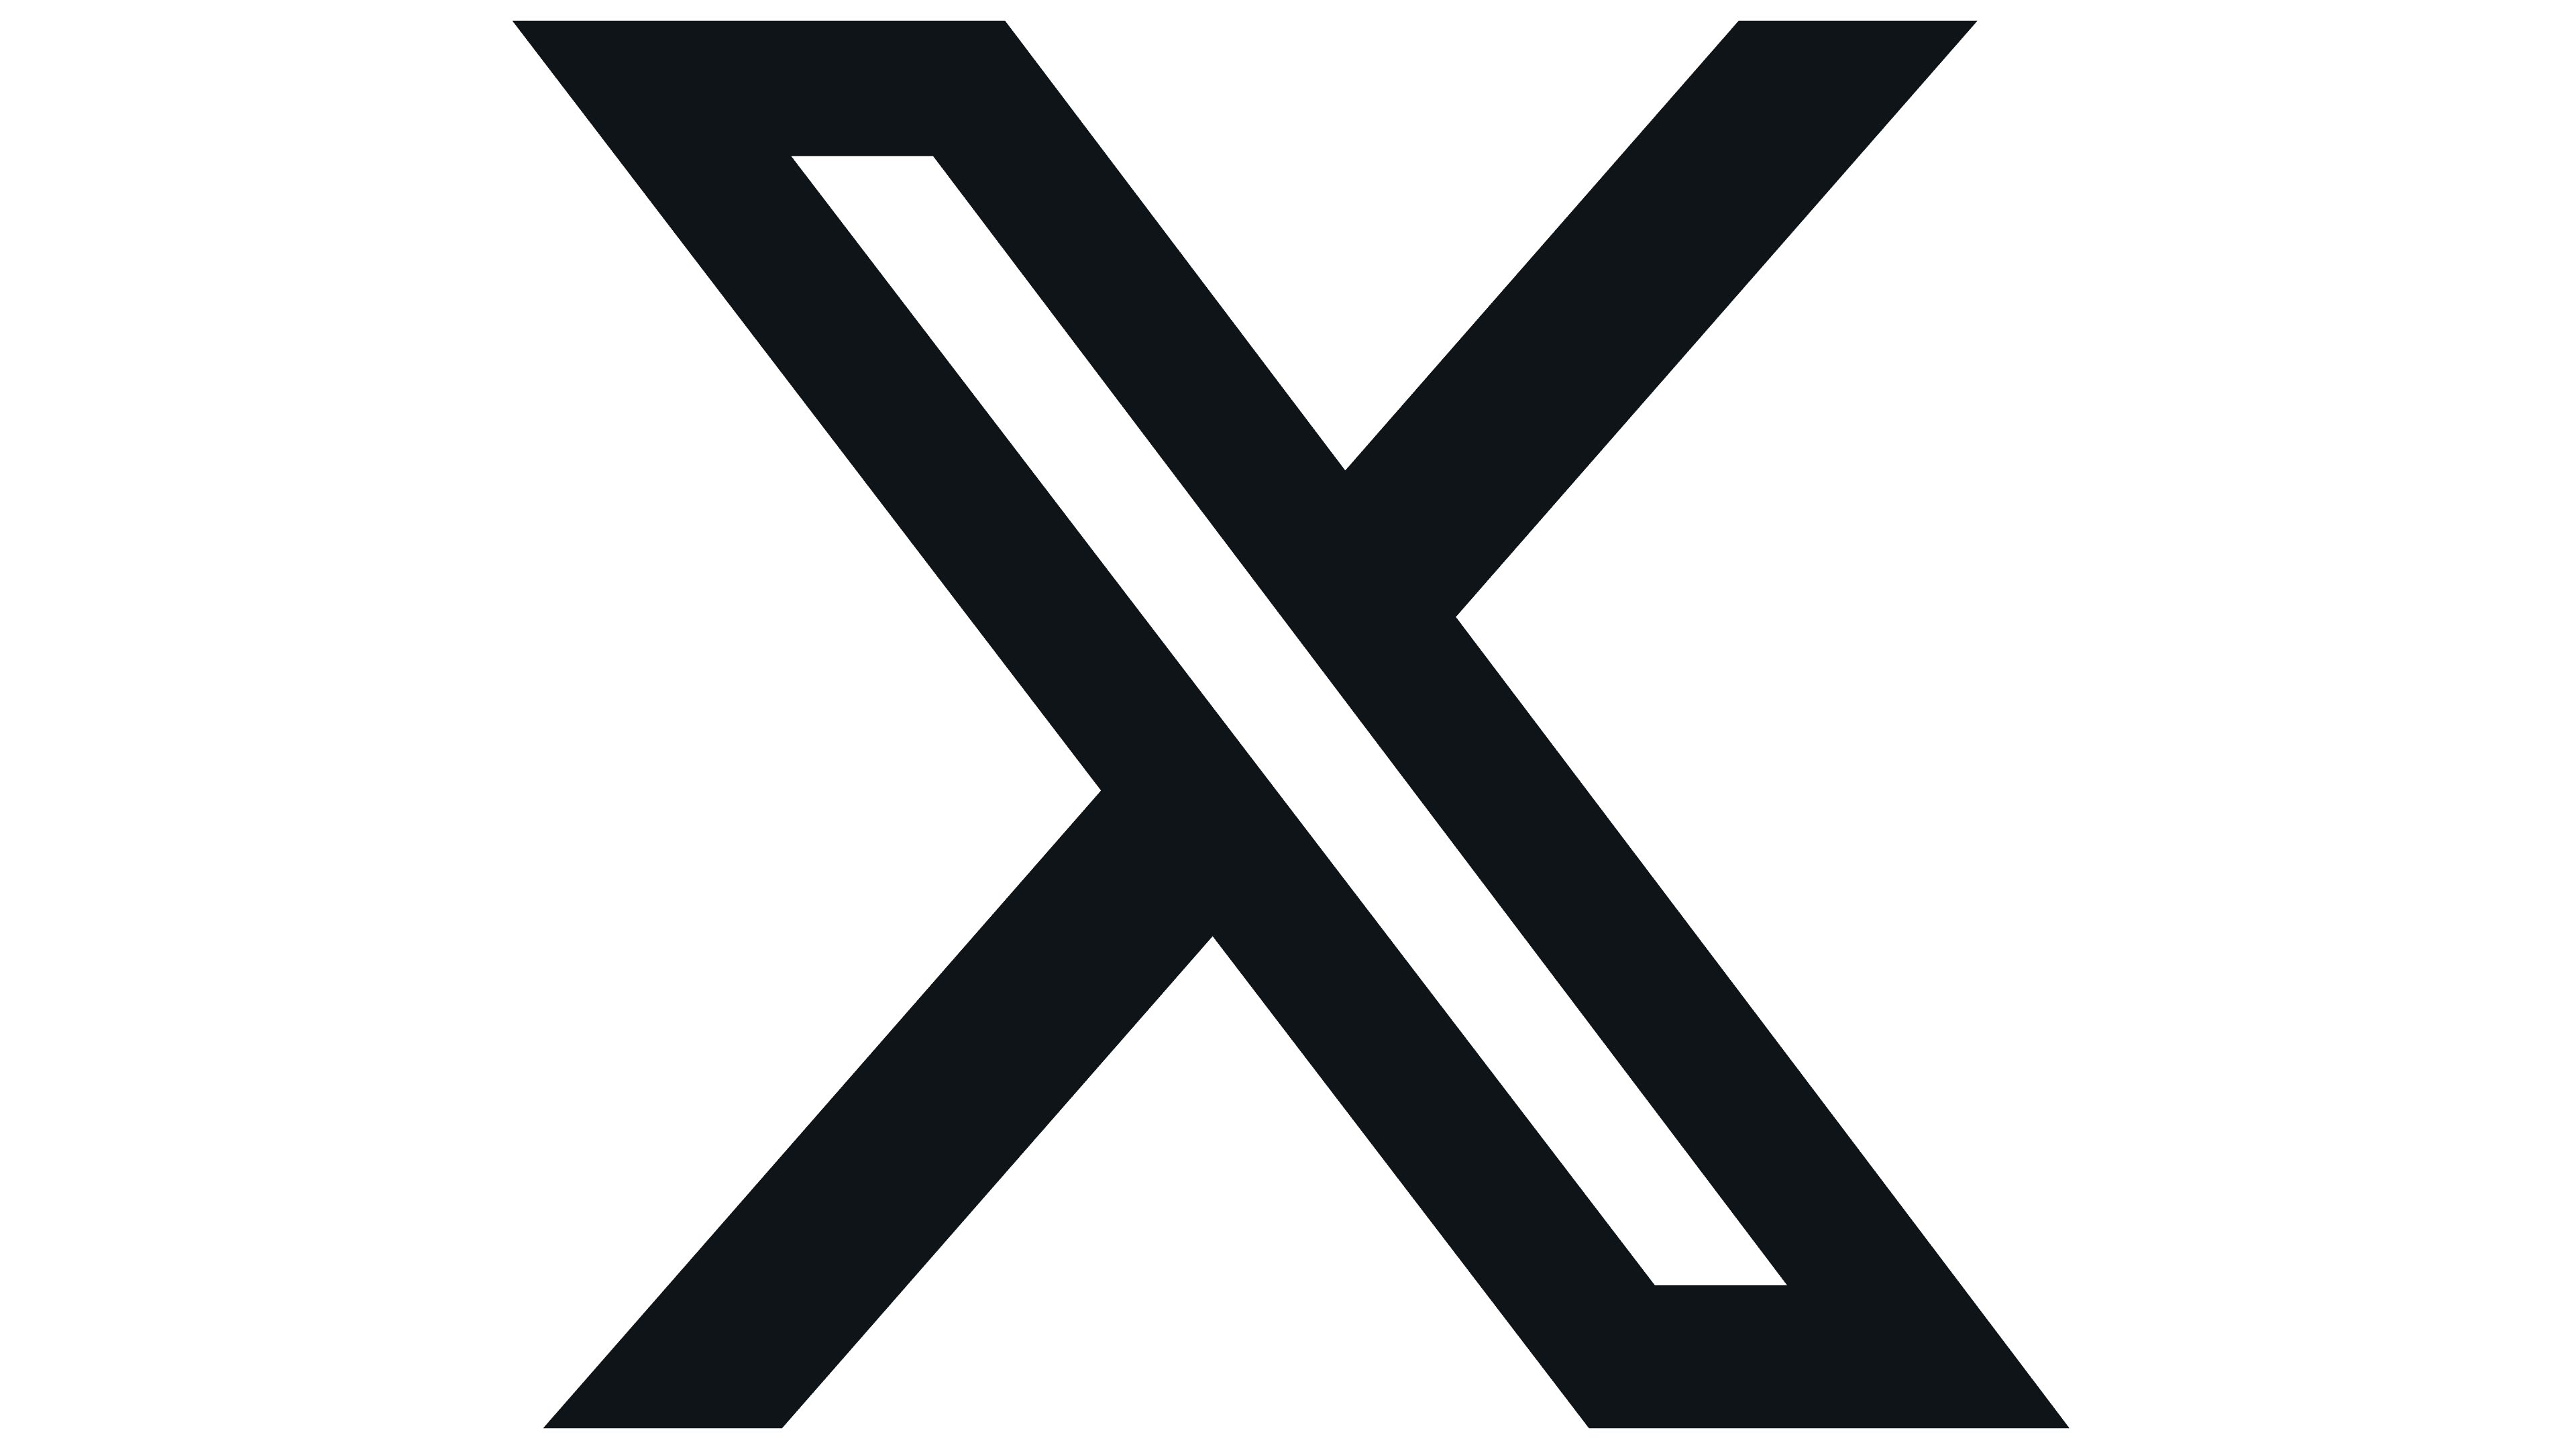 Kix Logo and symbol, meaning, history, PNG, brand